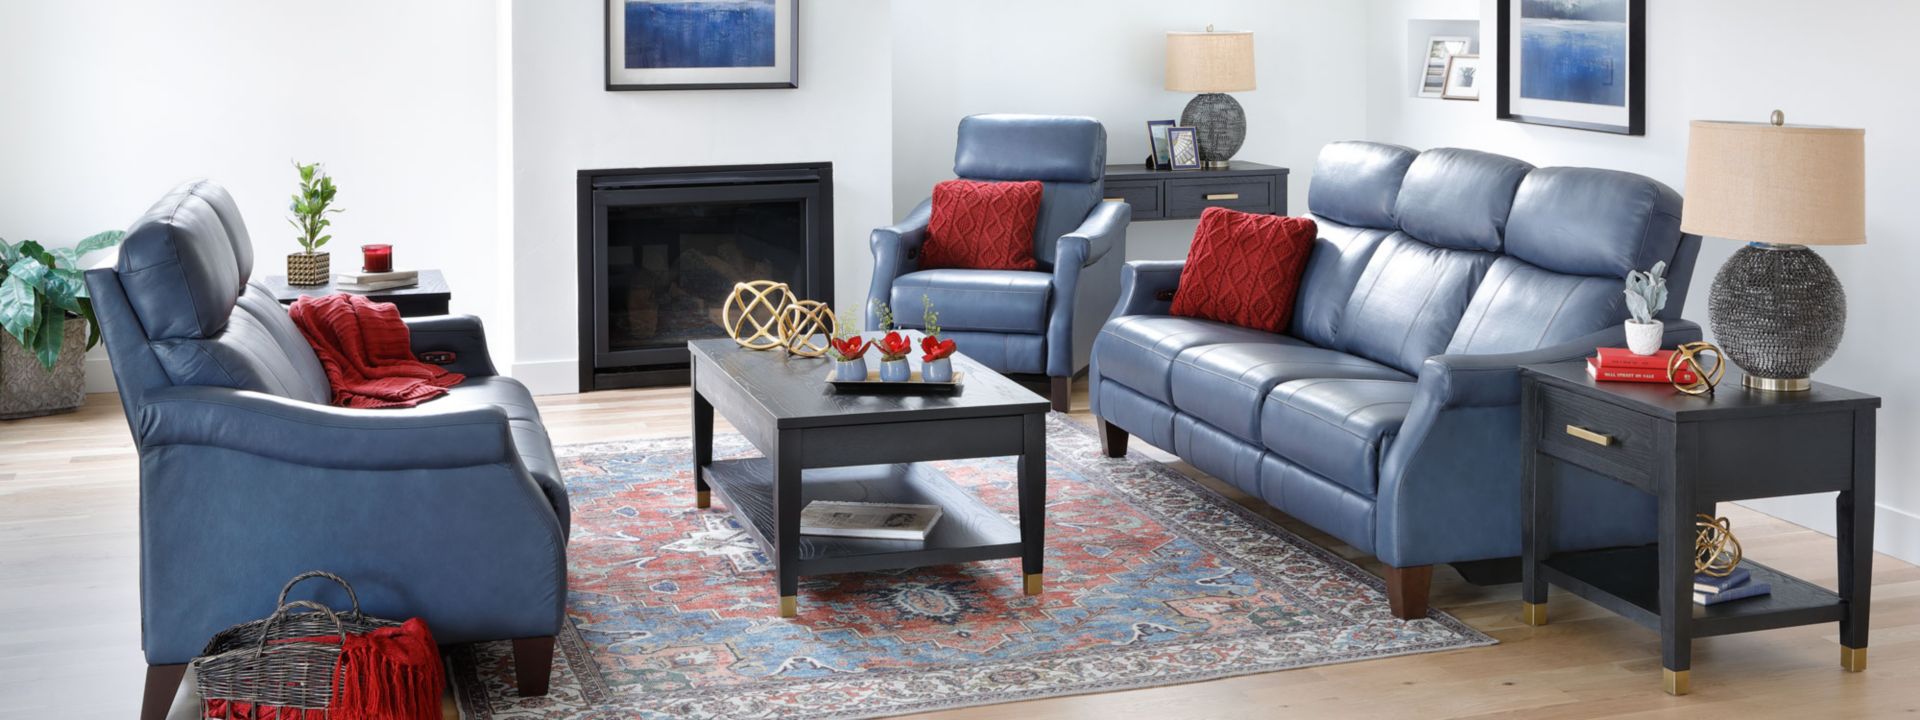 Astra Sofa Group. Blue leather Sofa, Love seat, and chair in home.